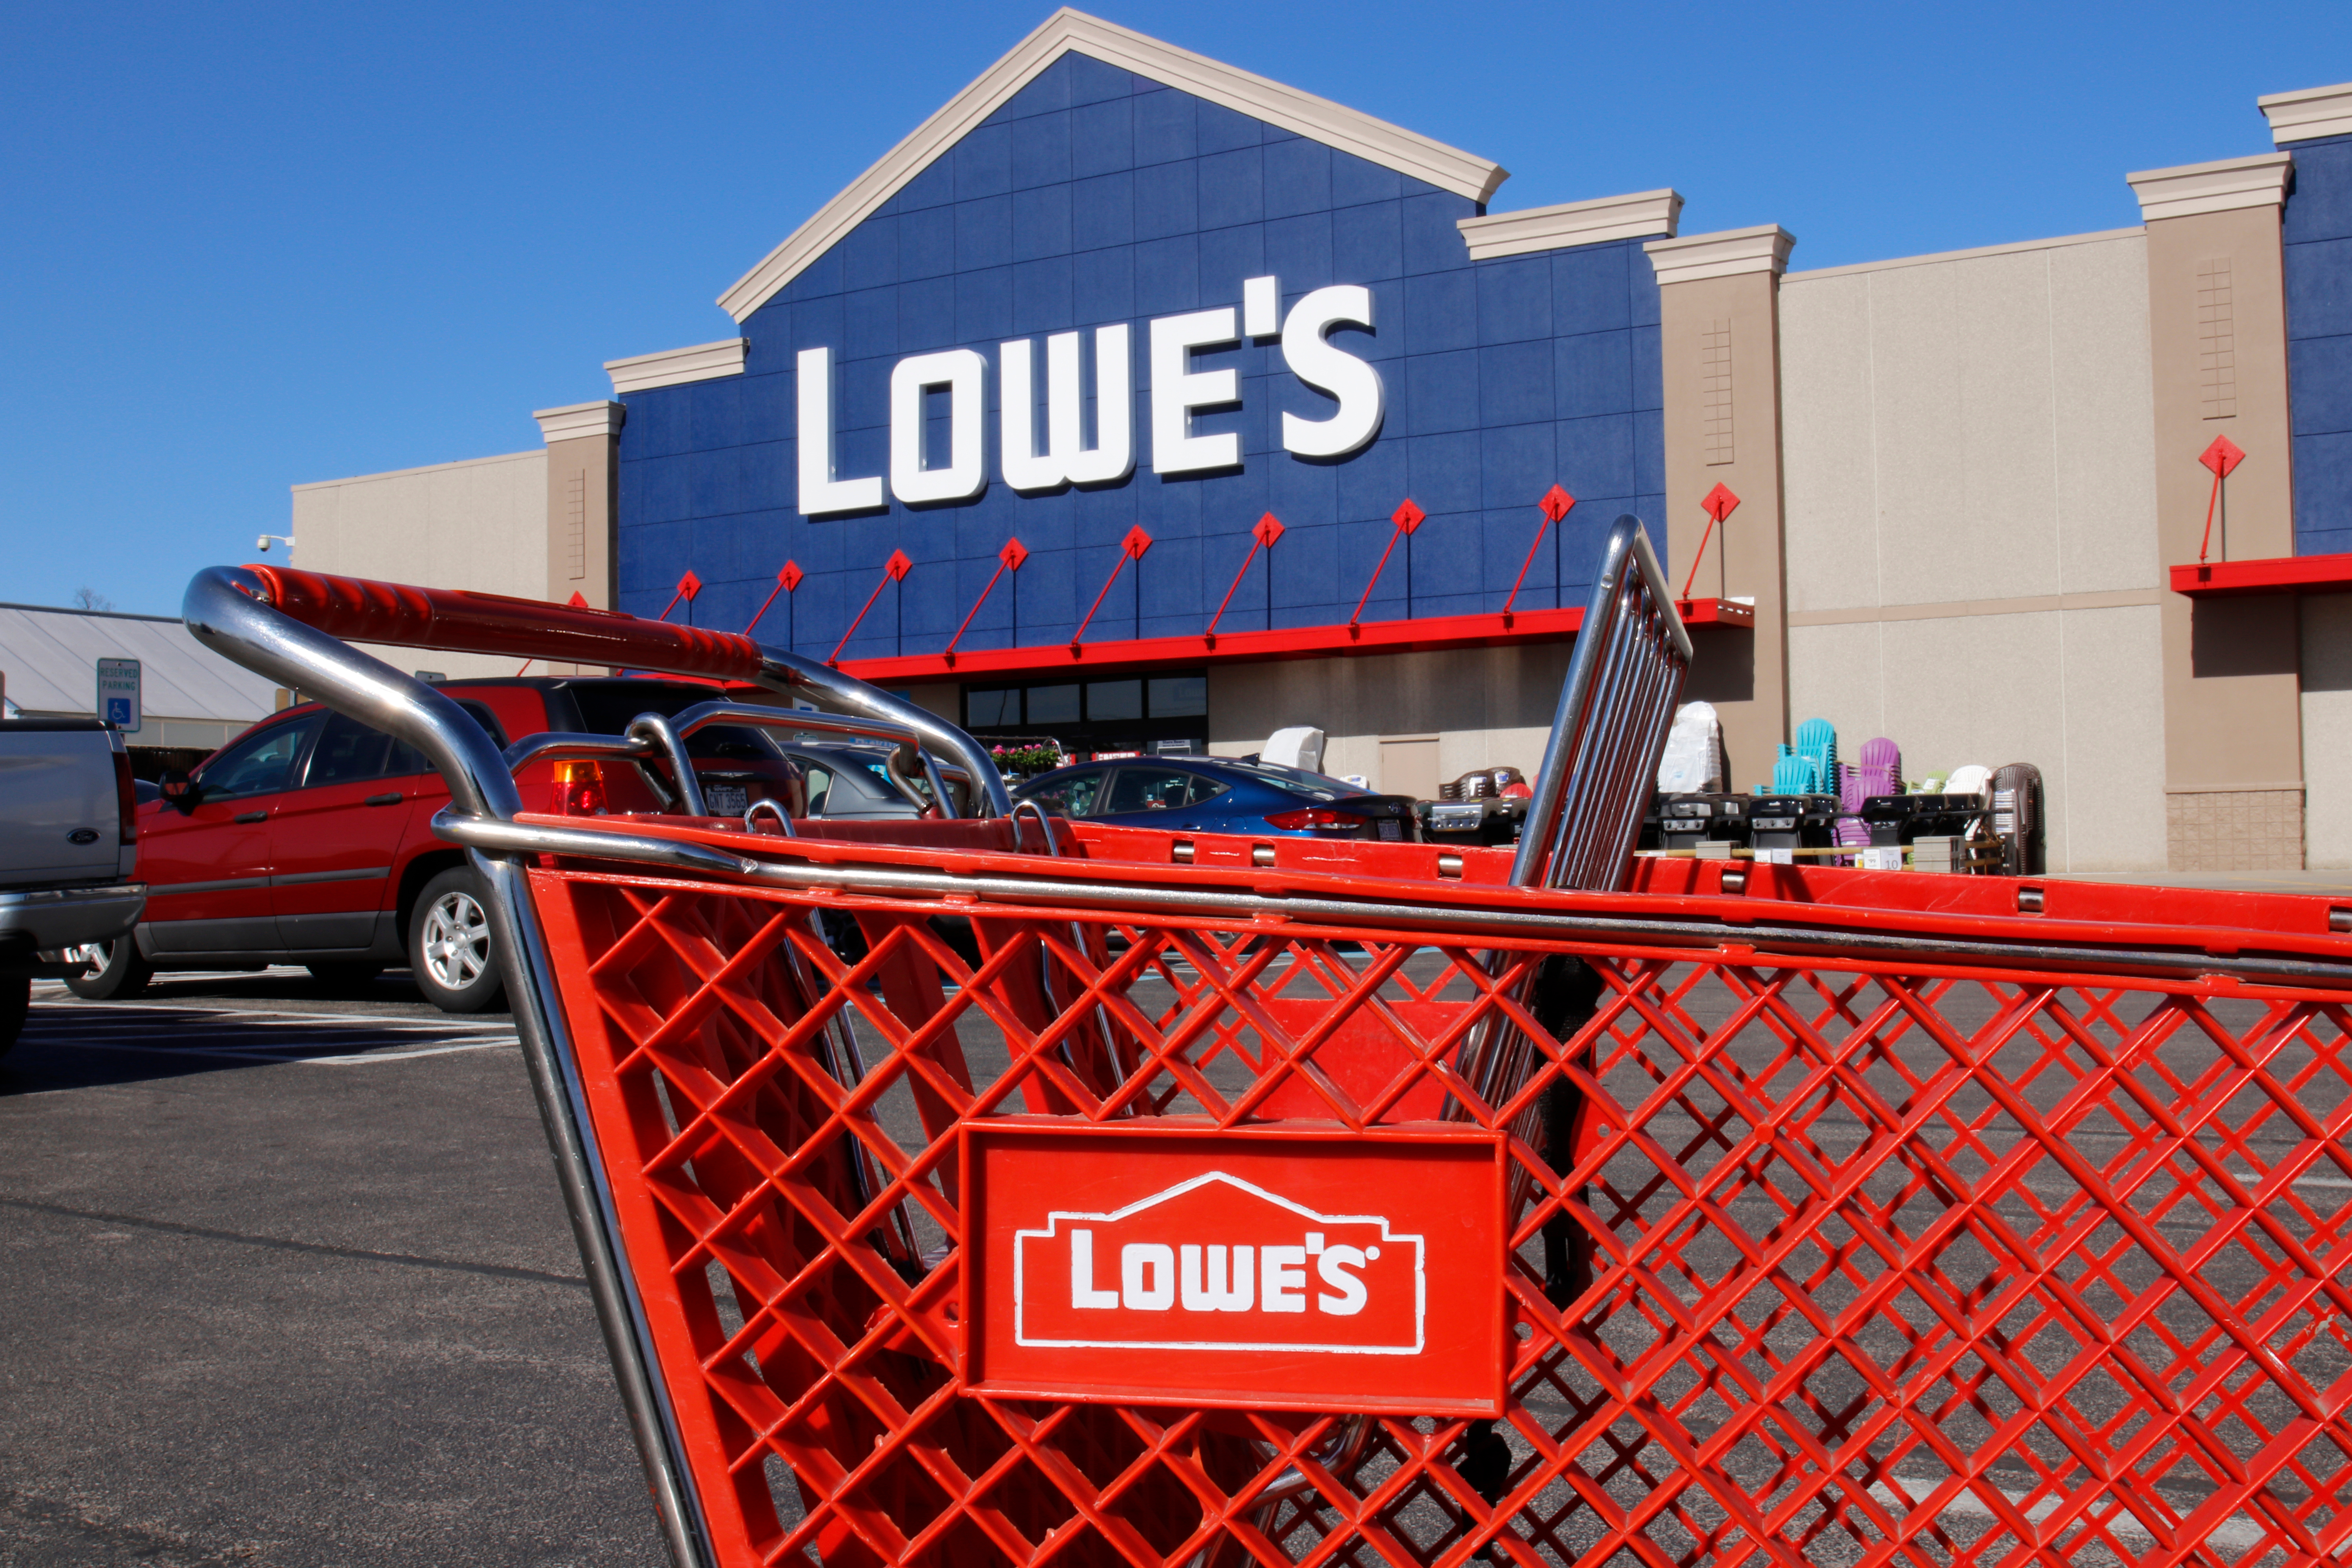 A red Lowe's shopping cart in front of a Lowe's storefront